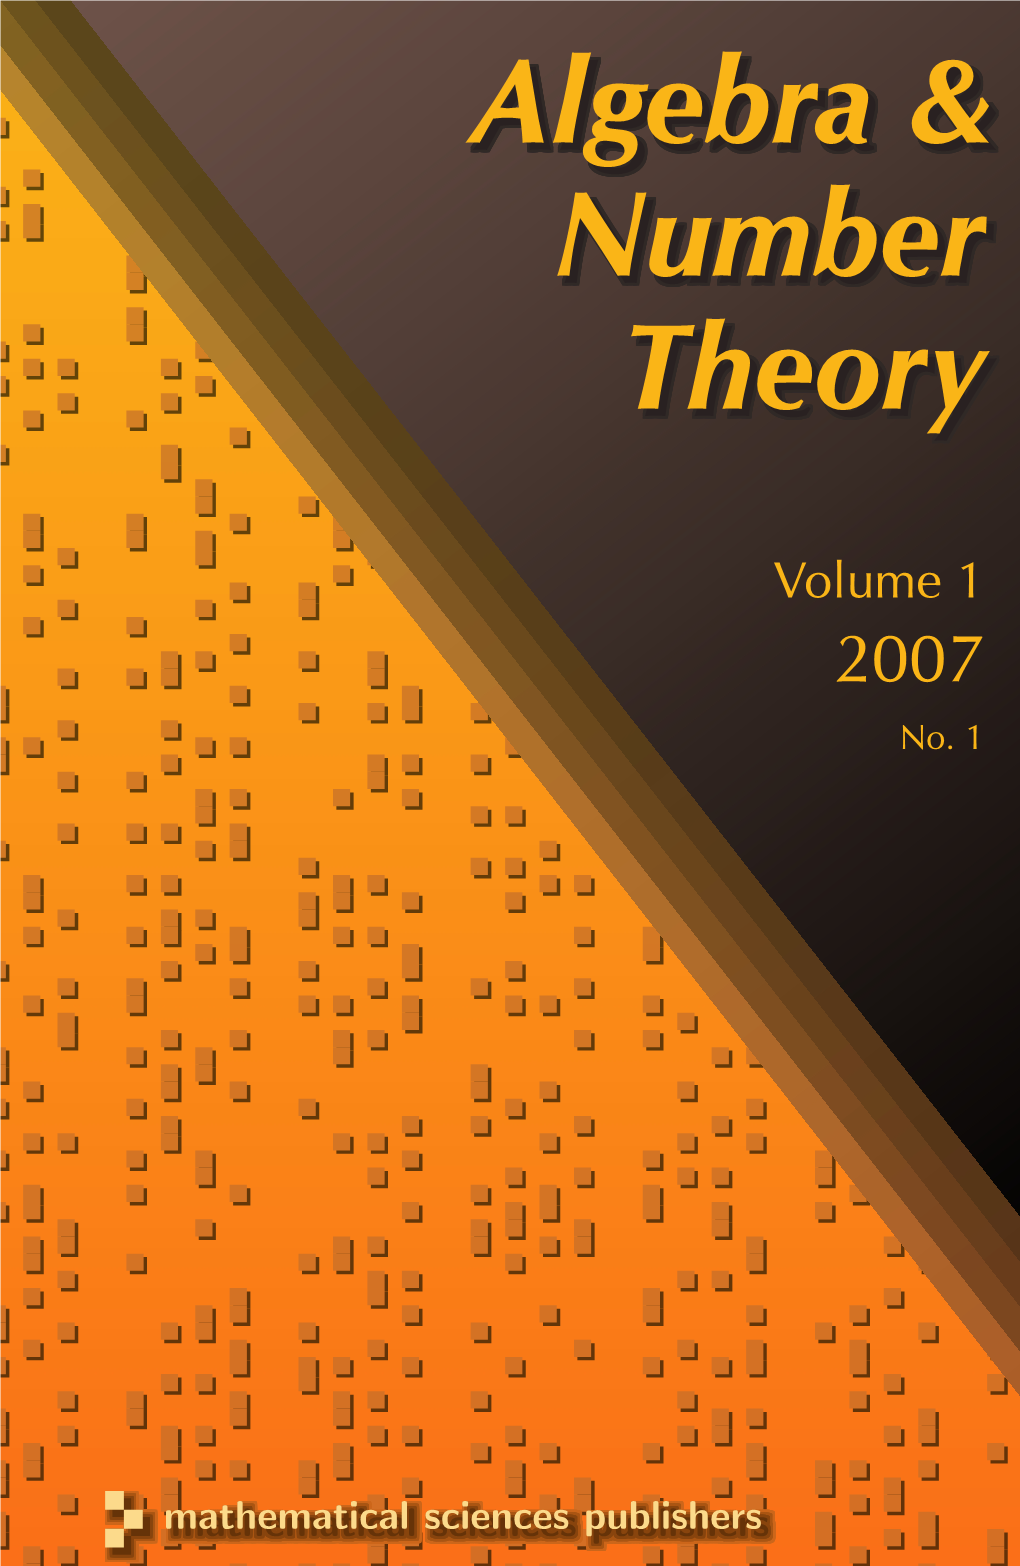 Algebra & Number Theory Vol 1 Issue 1, 2007